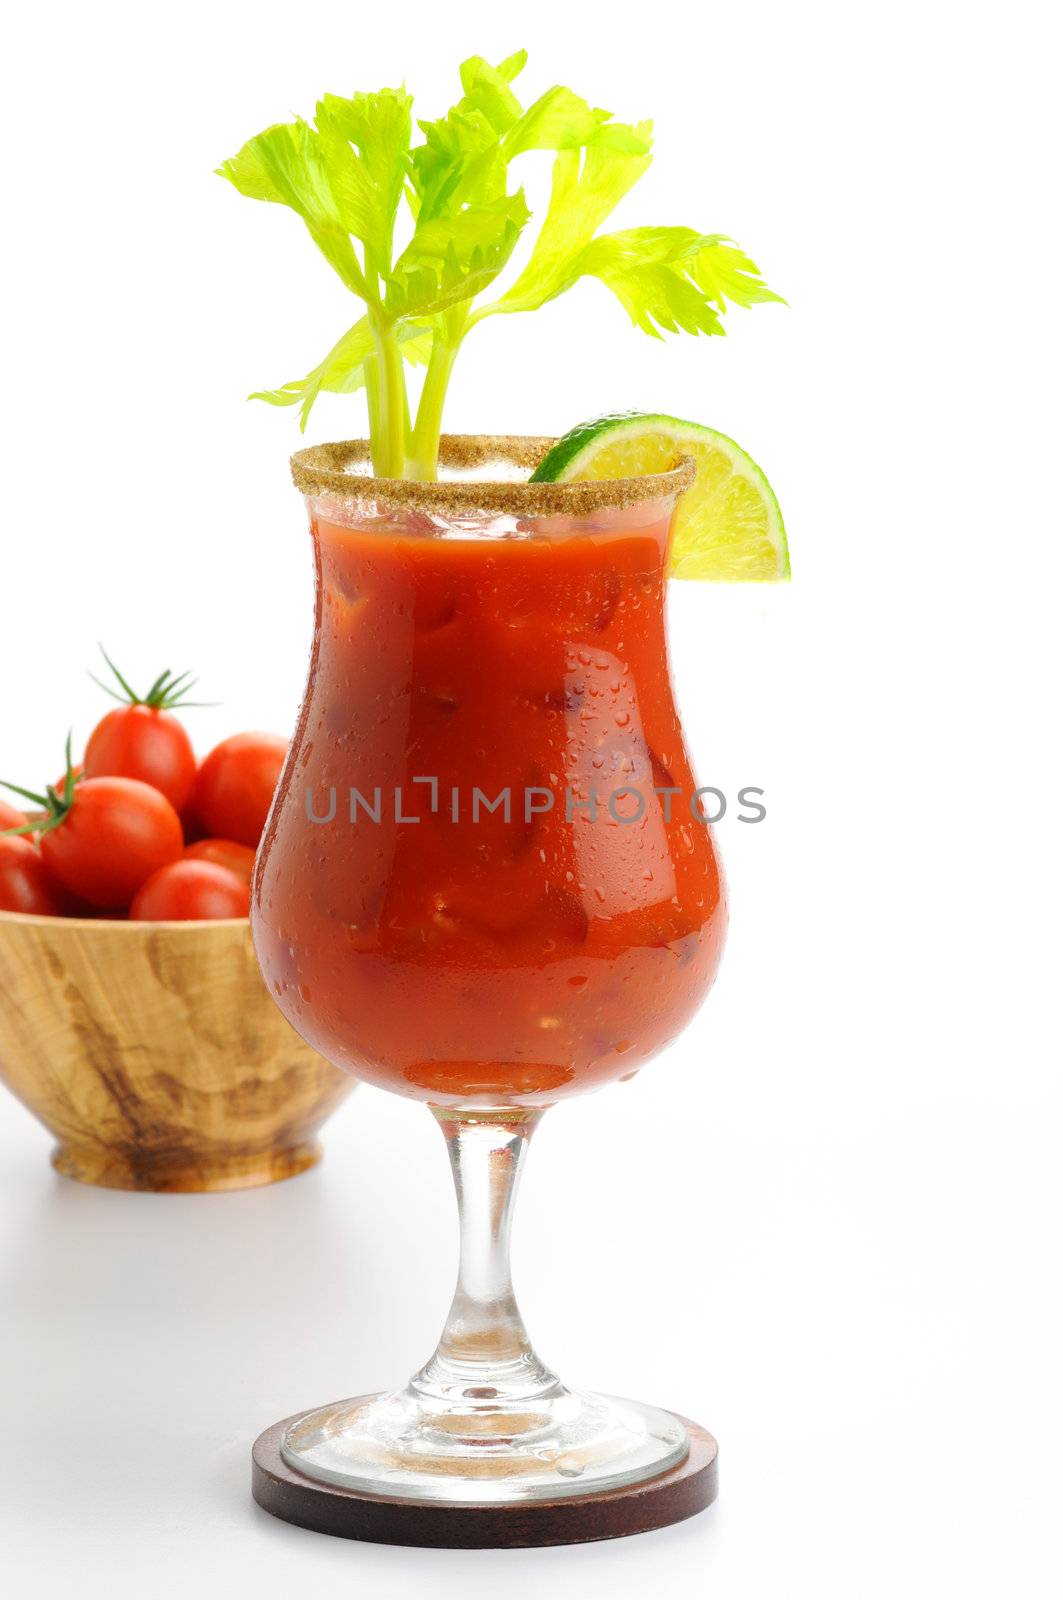 Delicious cocktail made with fresh tomato juice.